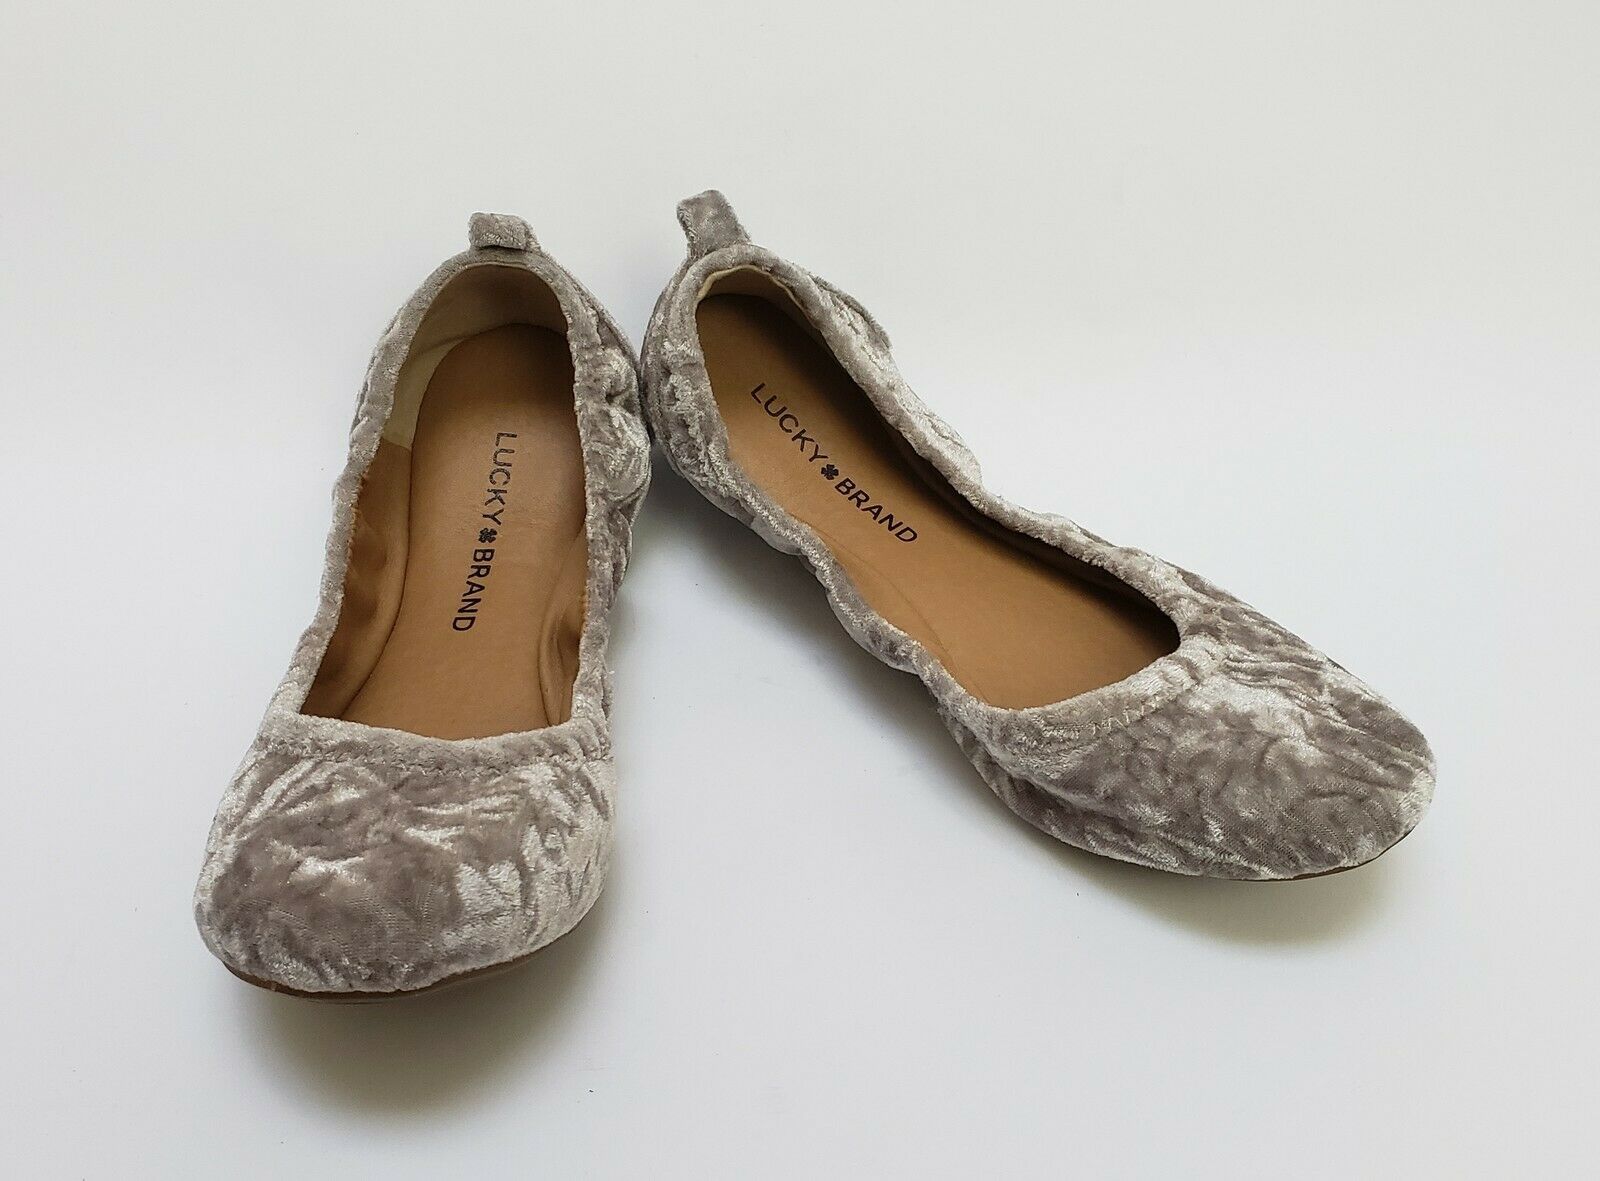 Primary image for Lucky Brand Shoes Ballet Flats Crushed Velvet Gray Eleesia Size US 7.5 EU 37.5